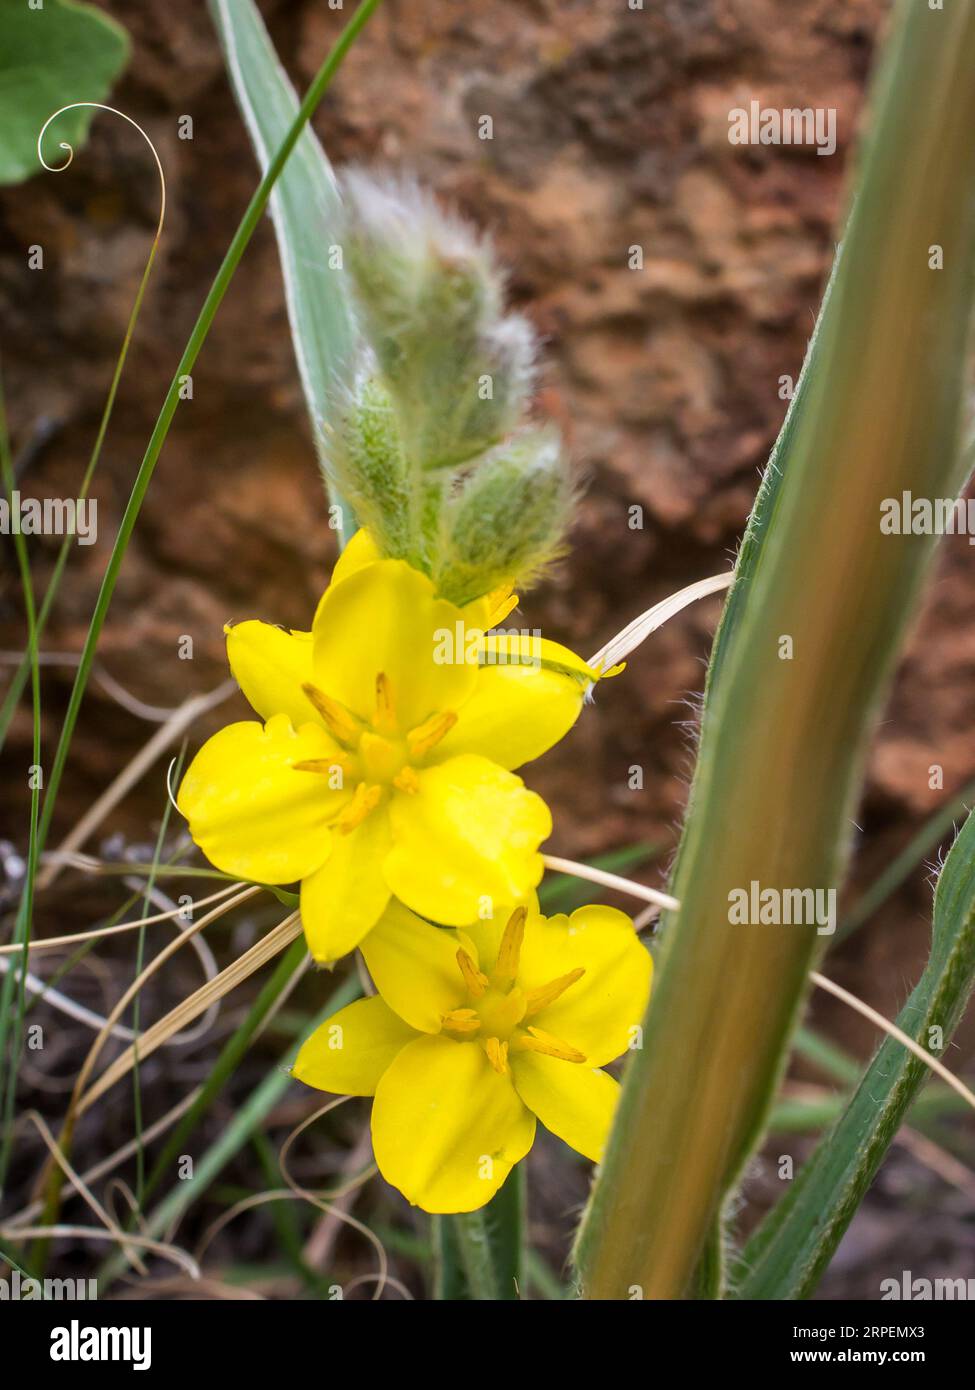 The Beautiful large yellow flowers of a Star flower, Hypoxis hemerocallidea Stock Photo